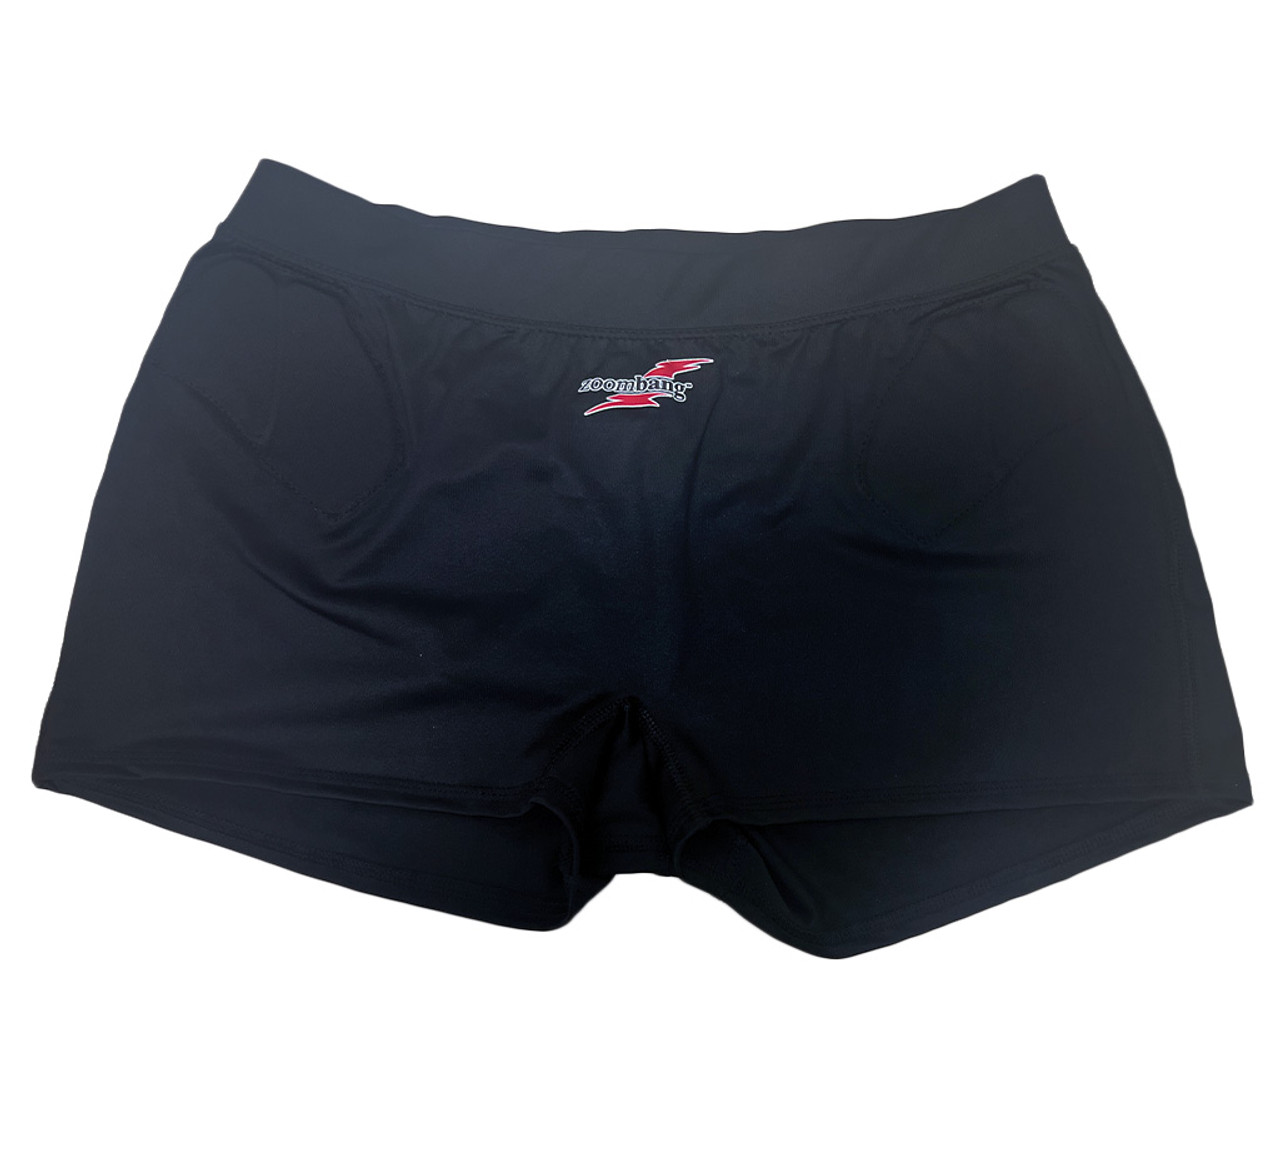 Female padded volleyball shorts V2 (patent pending) - Black | Jema  Volleyball